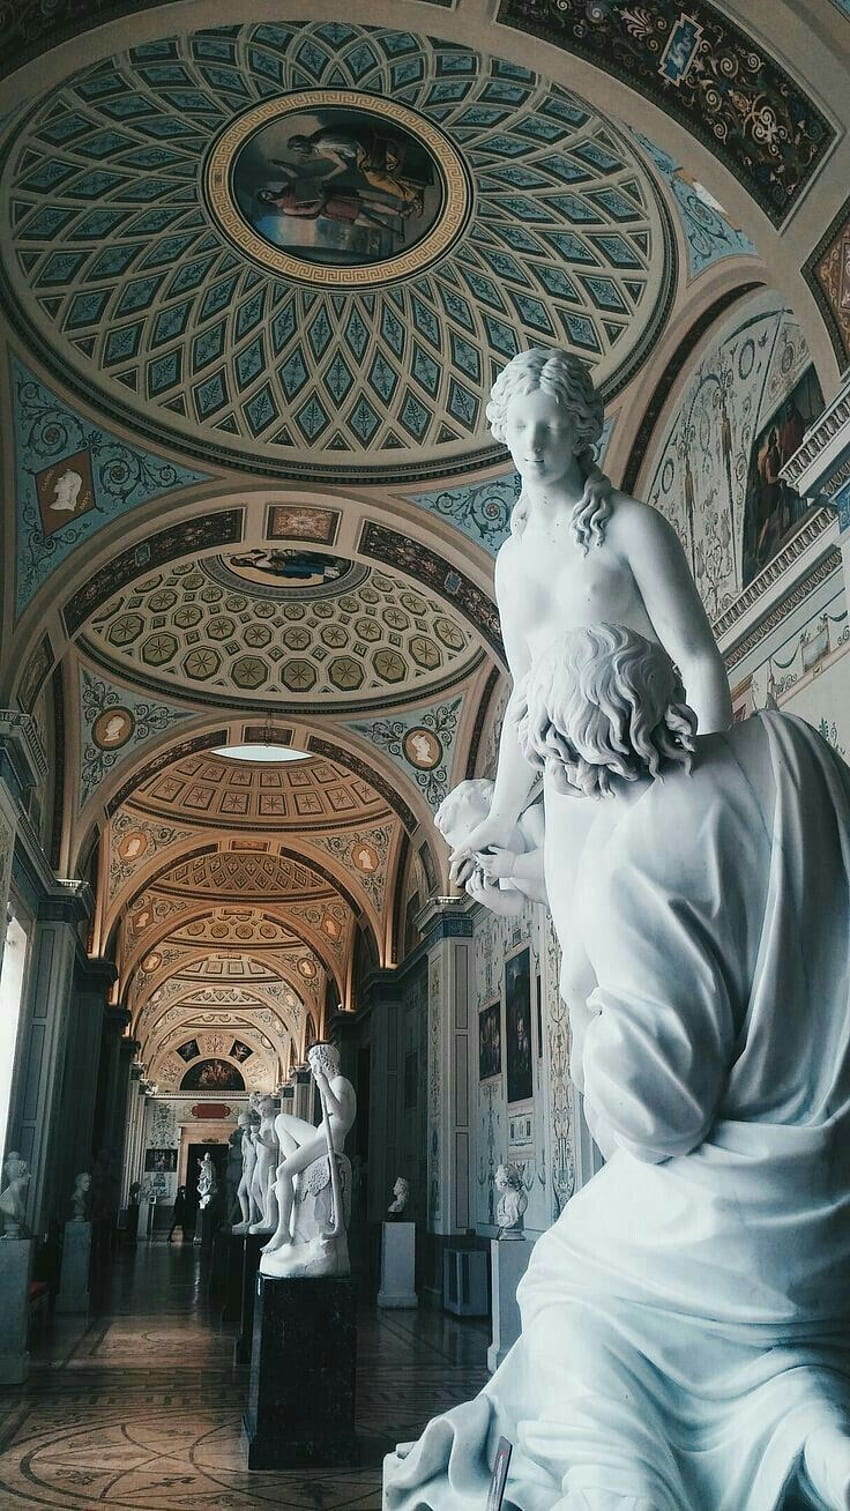 A large room with many statues in it - Architecture, Greek mythology